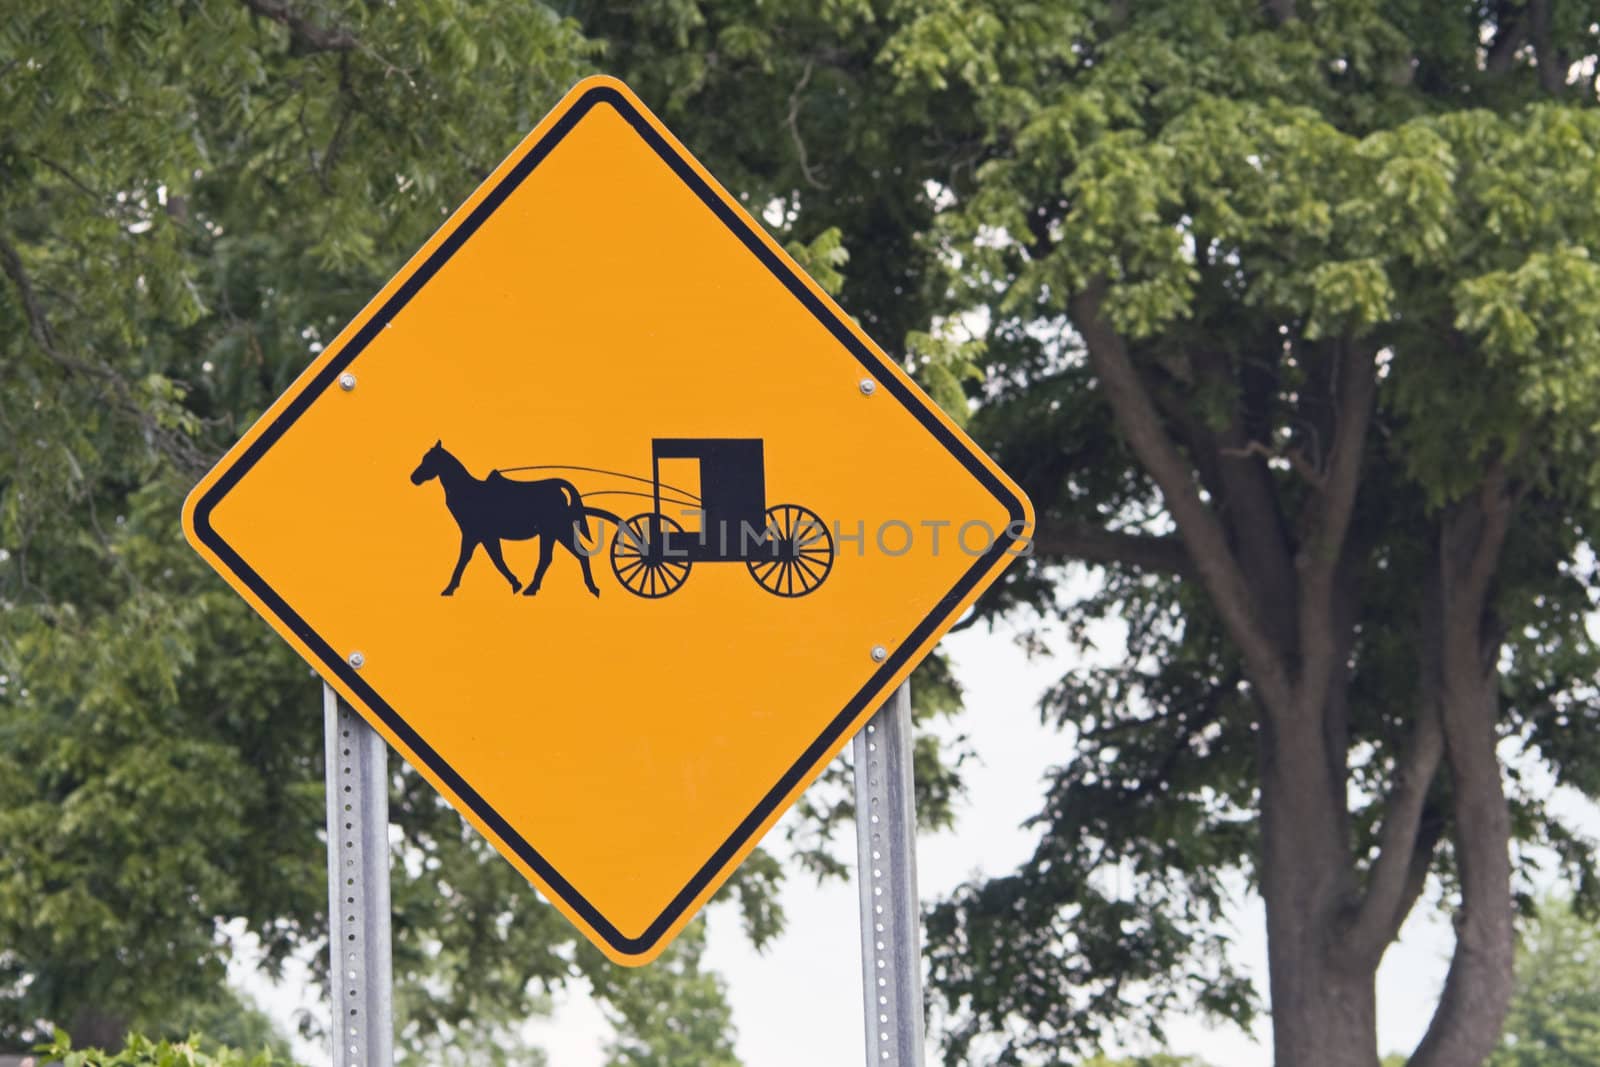 Careful! - Carriages... - seen in Michigan